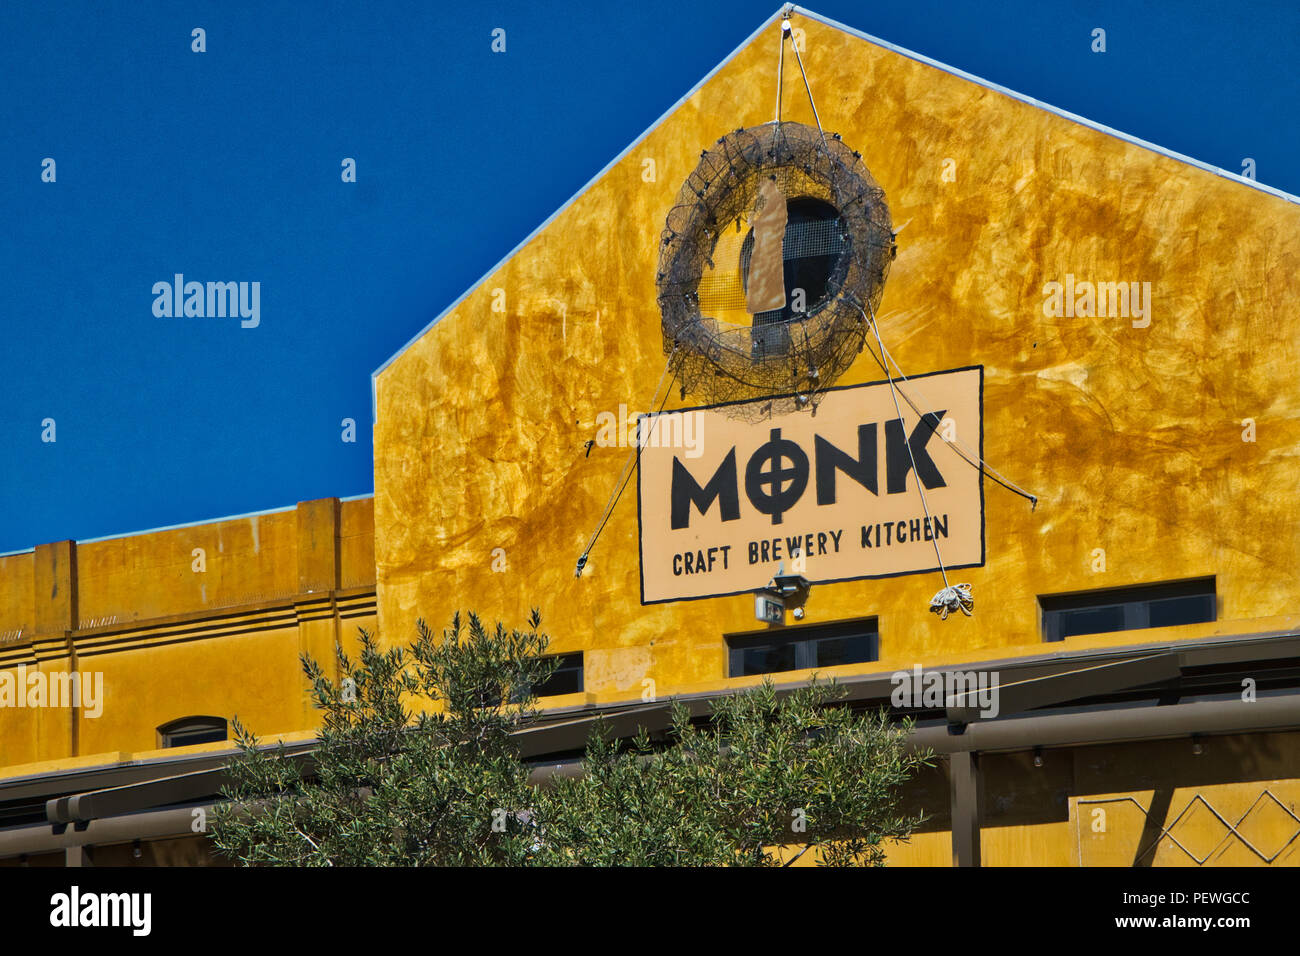 Monk craft brewery and restaurant Stock Photo